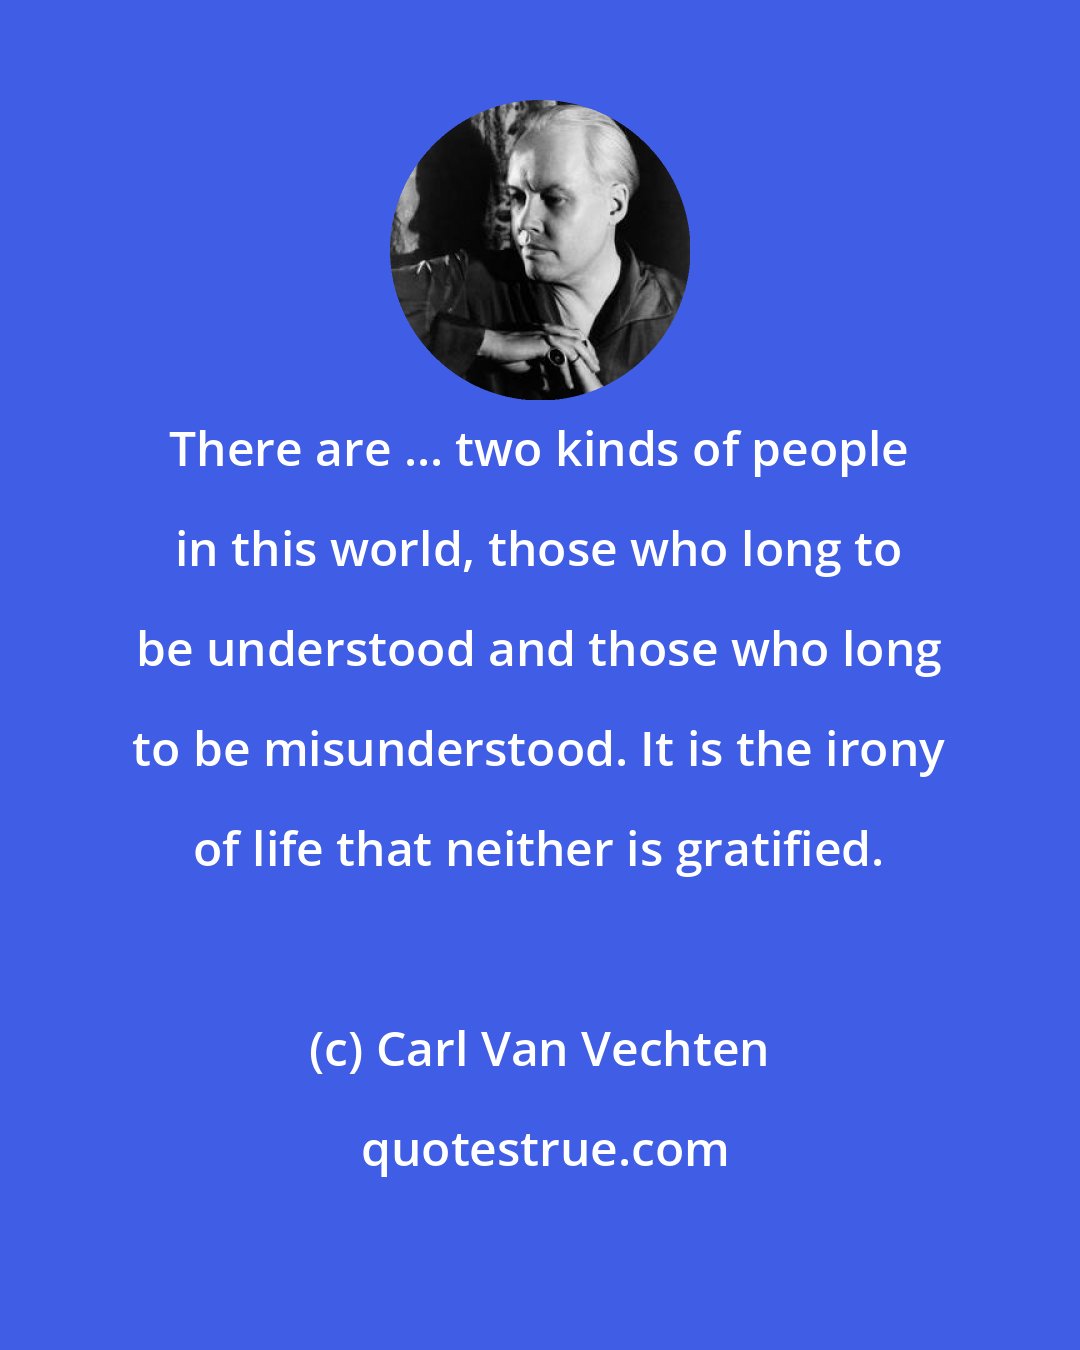 Carl Van Vechten: There are ... two kinds of people in this world, those who long to be understood and those who long to be misunderstood. It is the irony of life that neither is gratified.